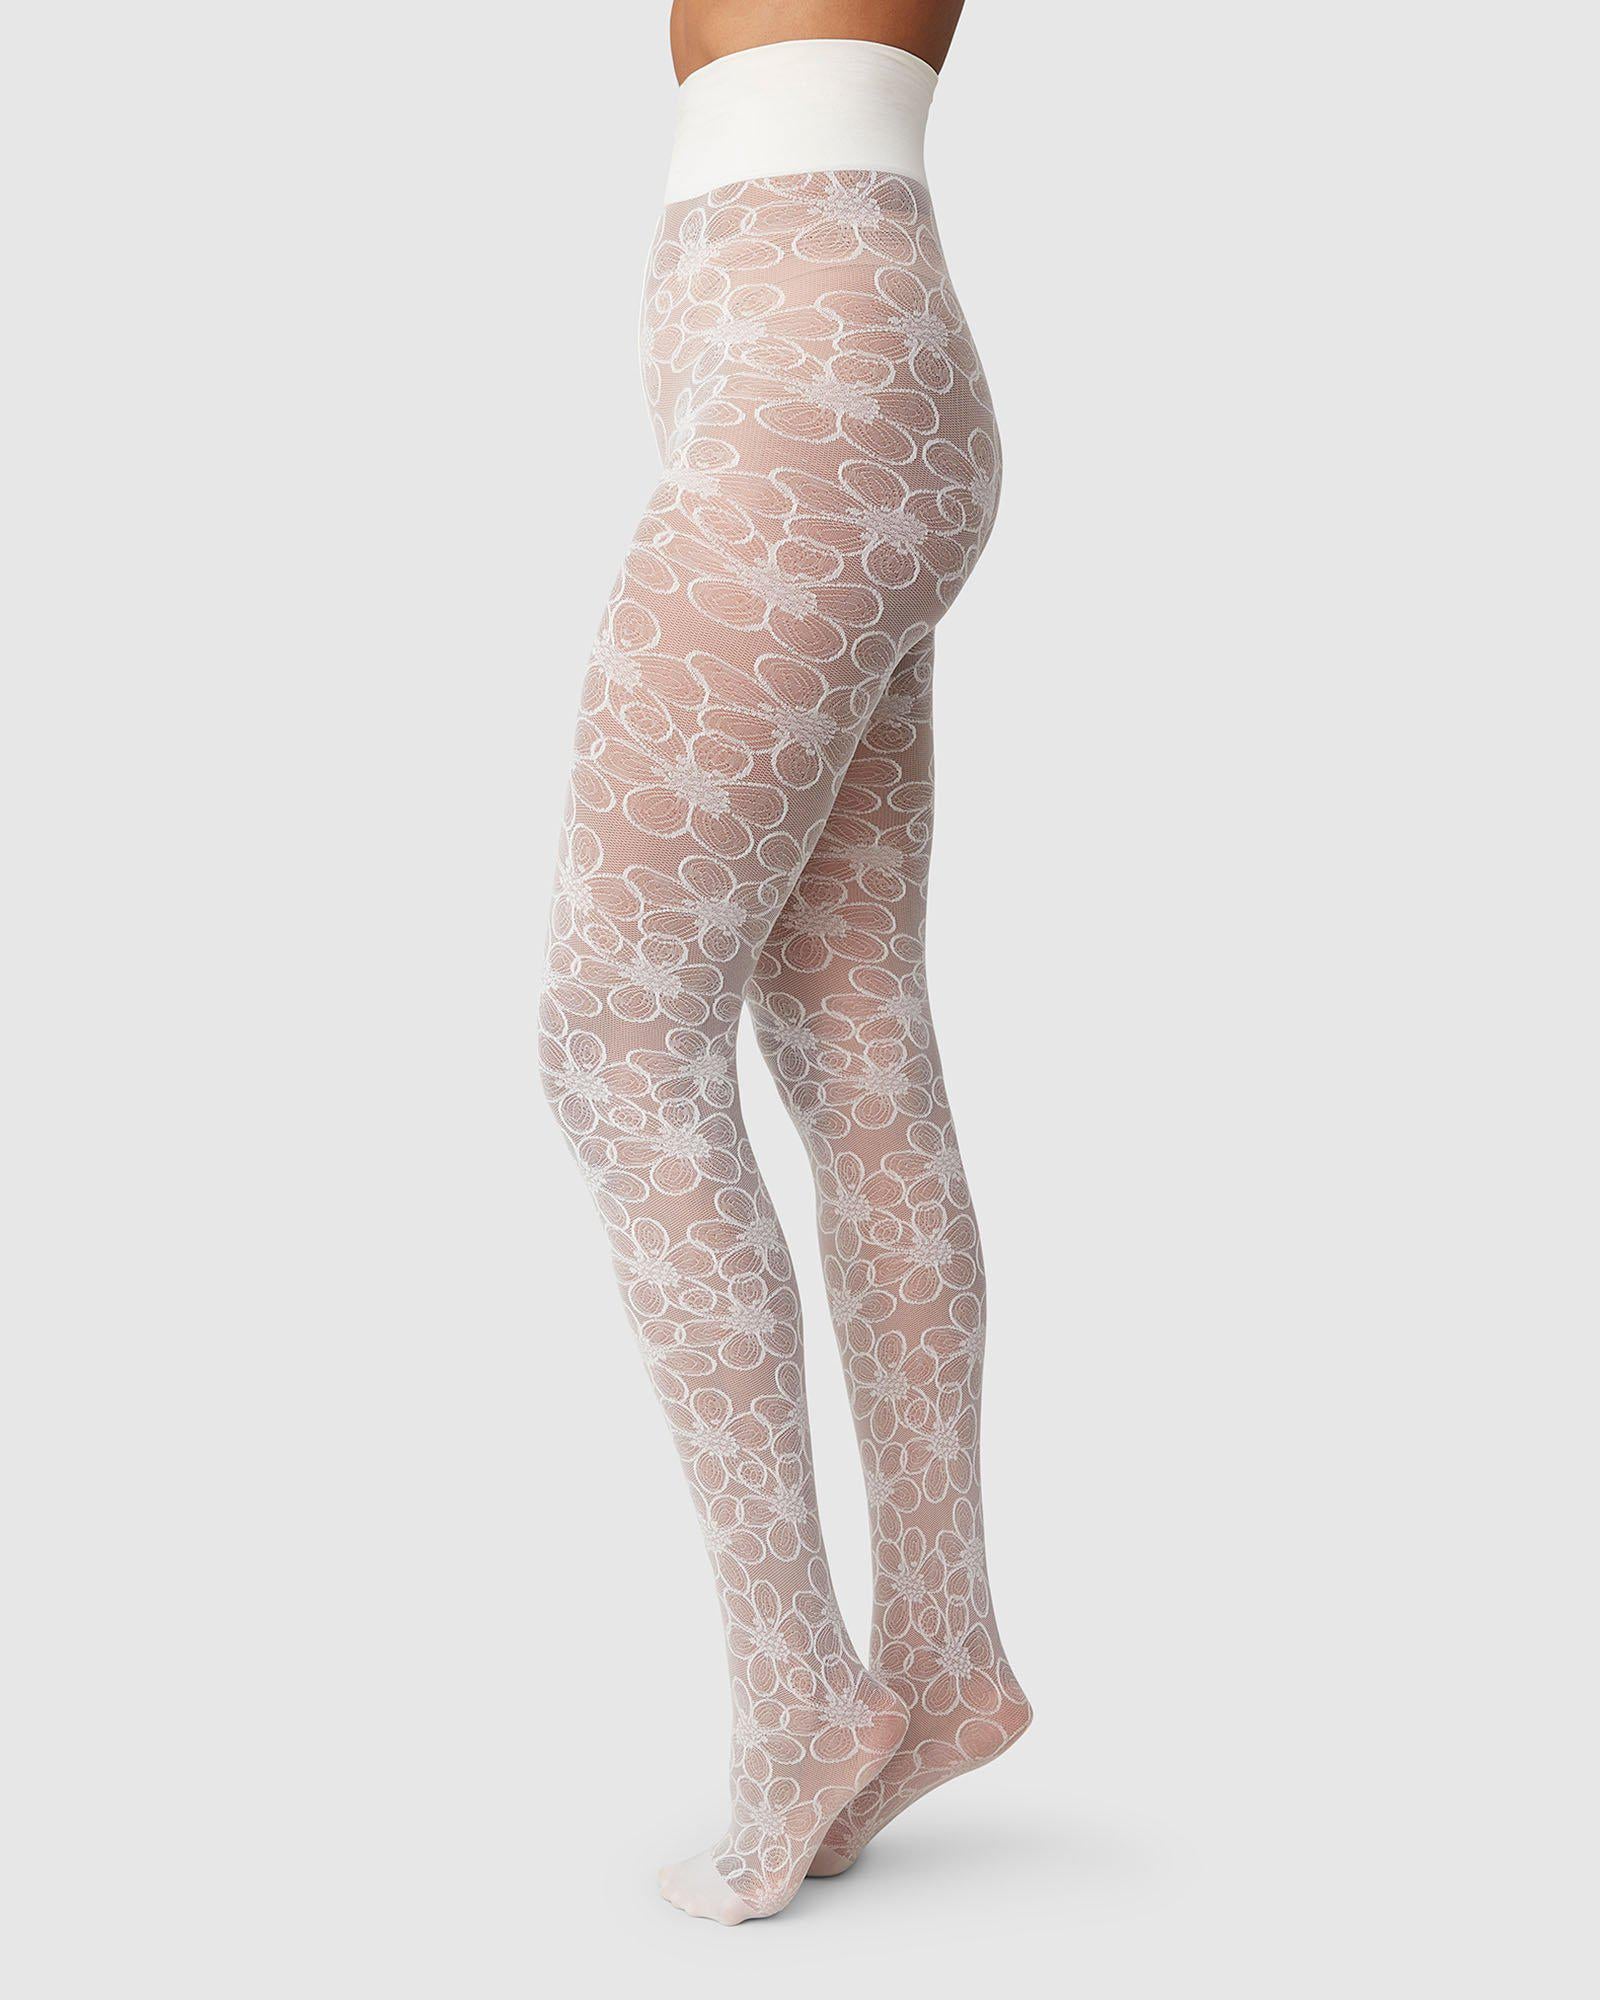 Buy Softwear Womens White Lace Leggings at